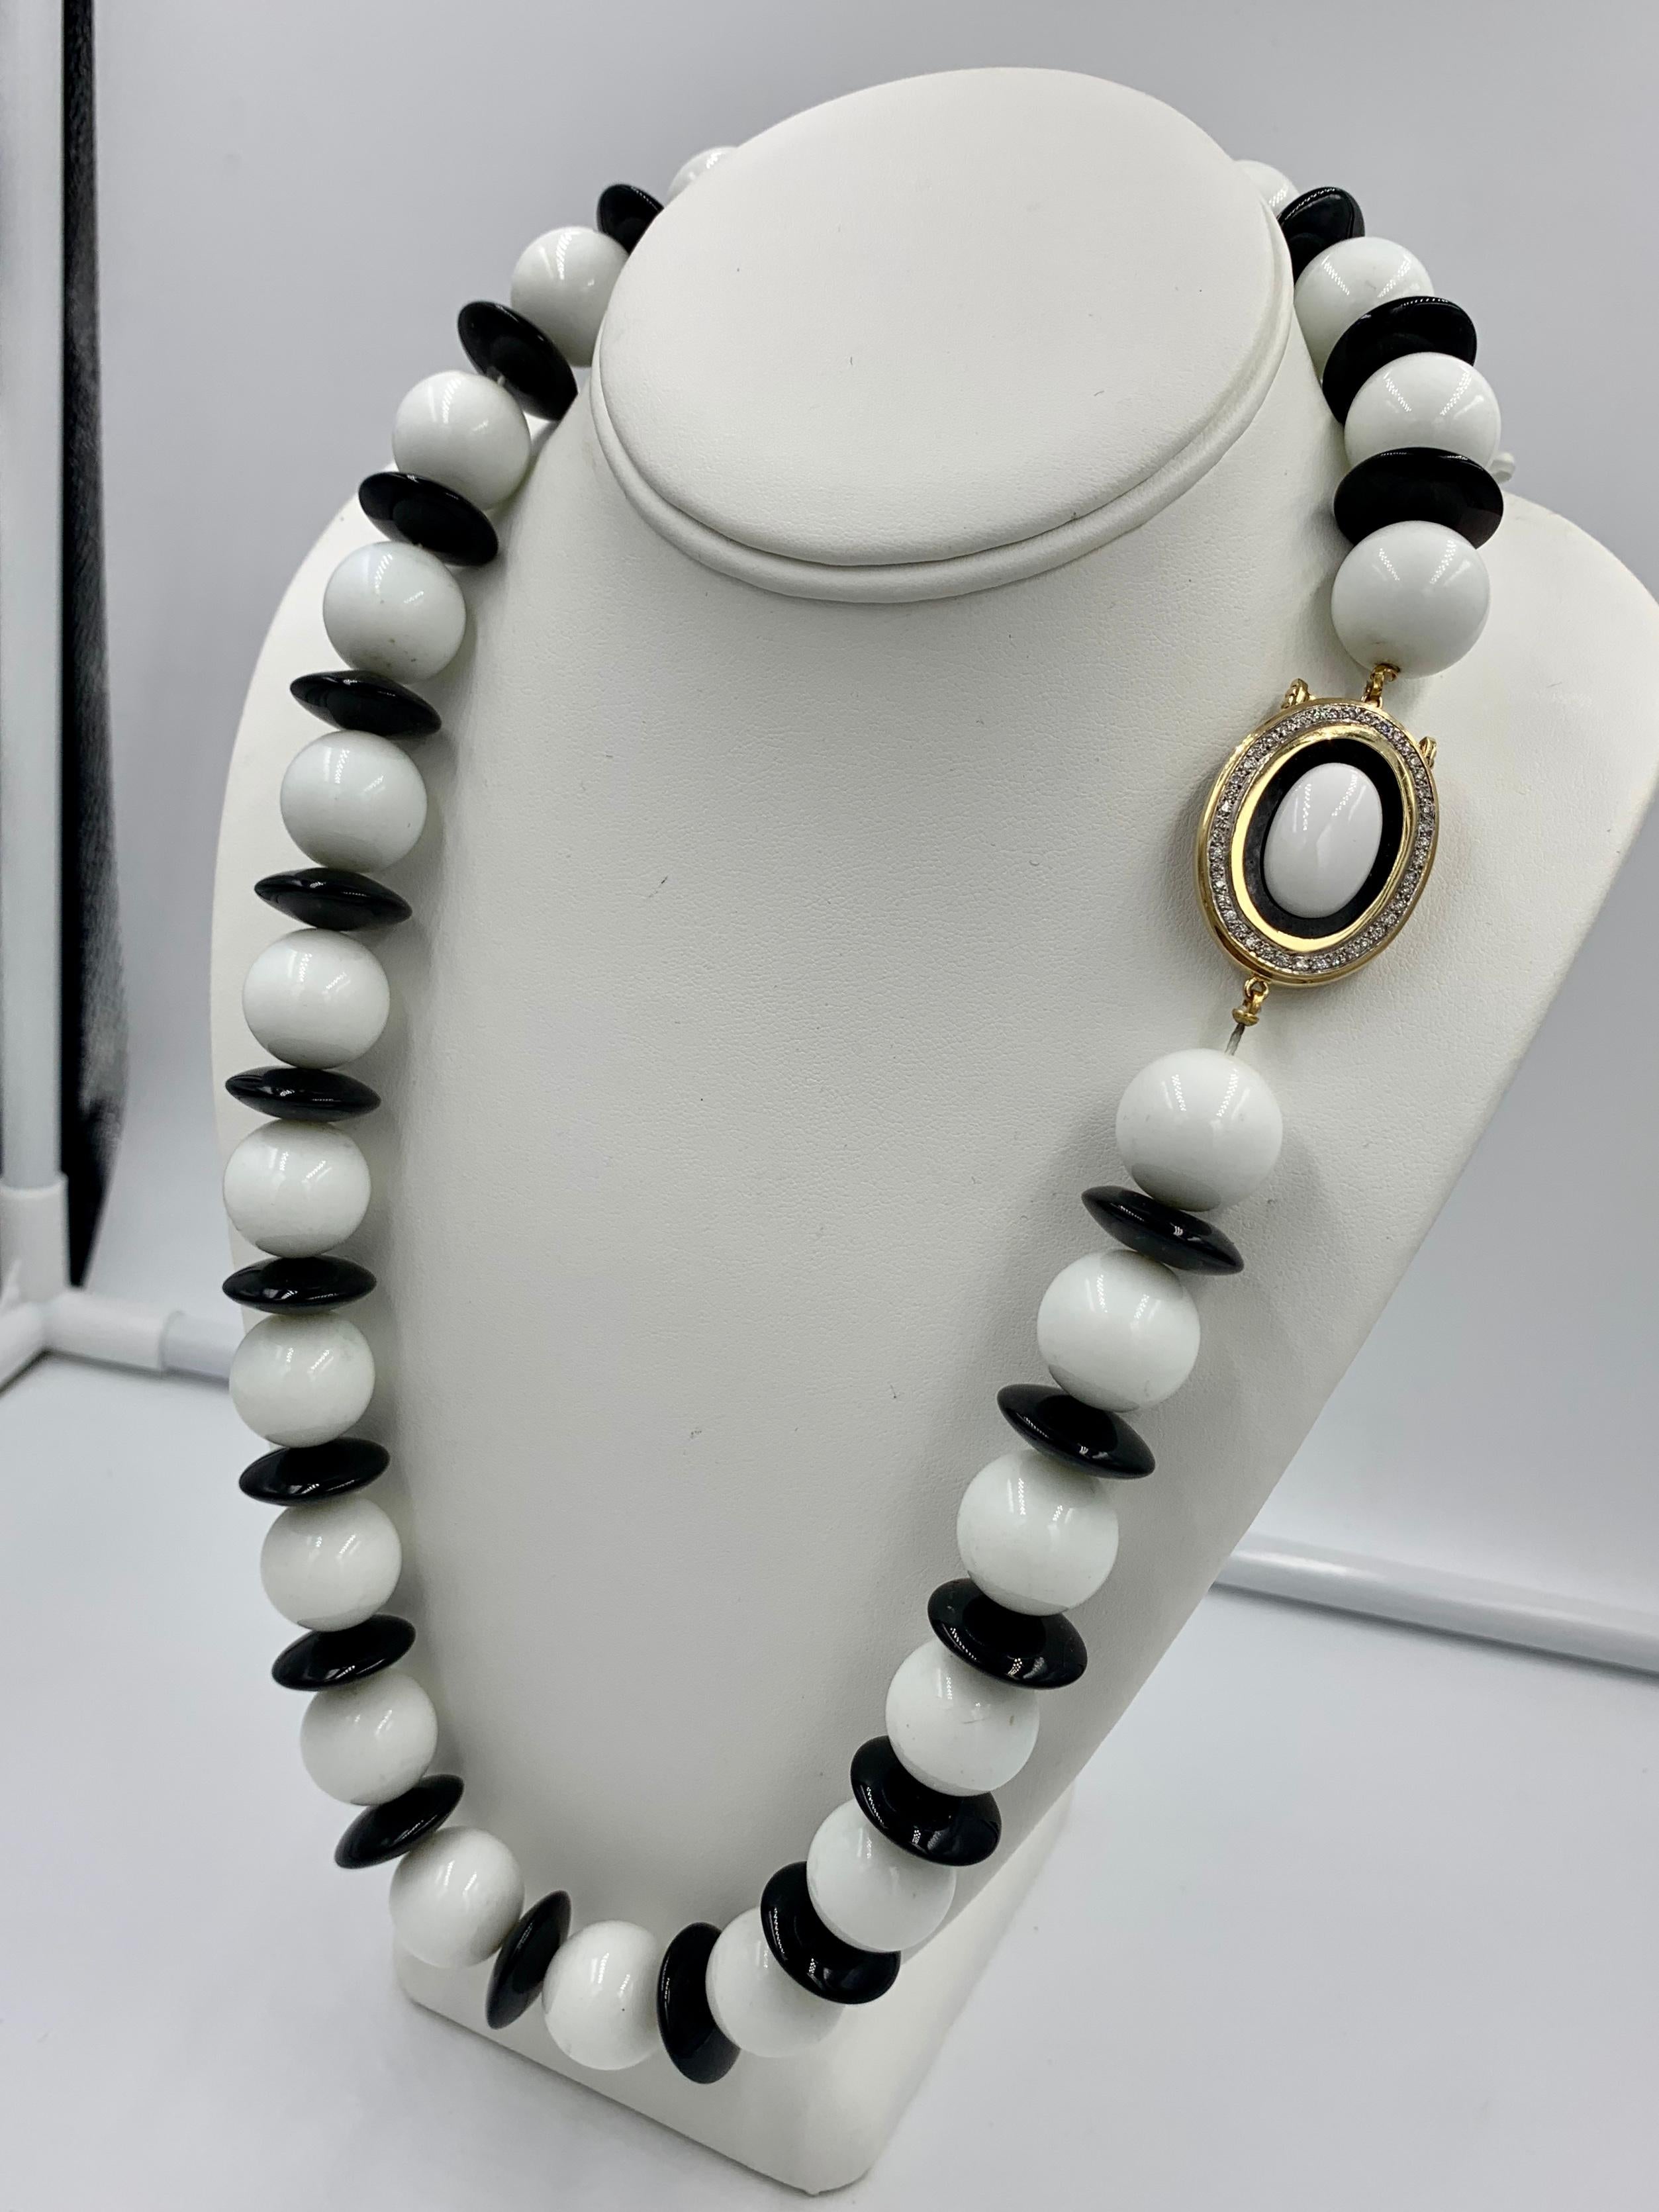 Black Onyx White Onyx 44 Diamond Necklace 14 Karat Gold In Excellent Condition For Sale In New York, NY